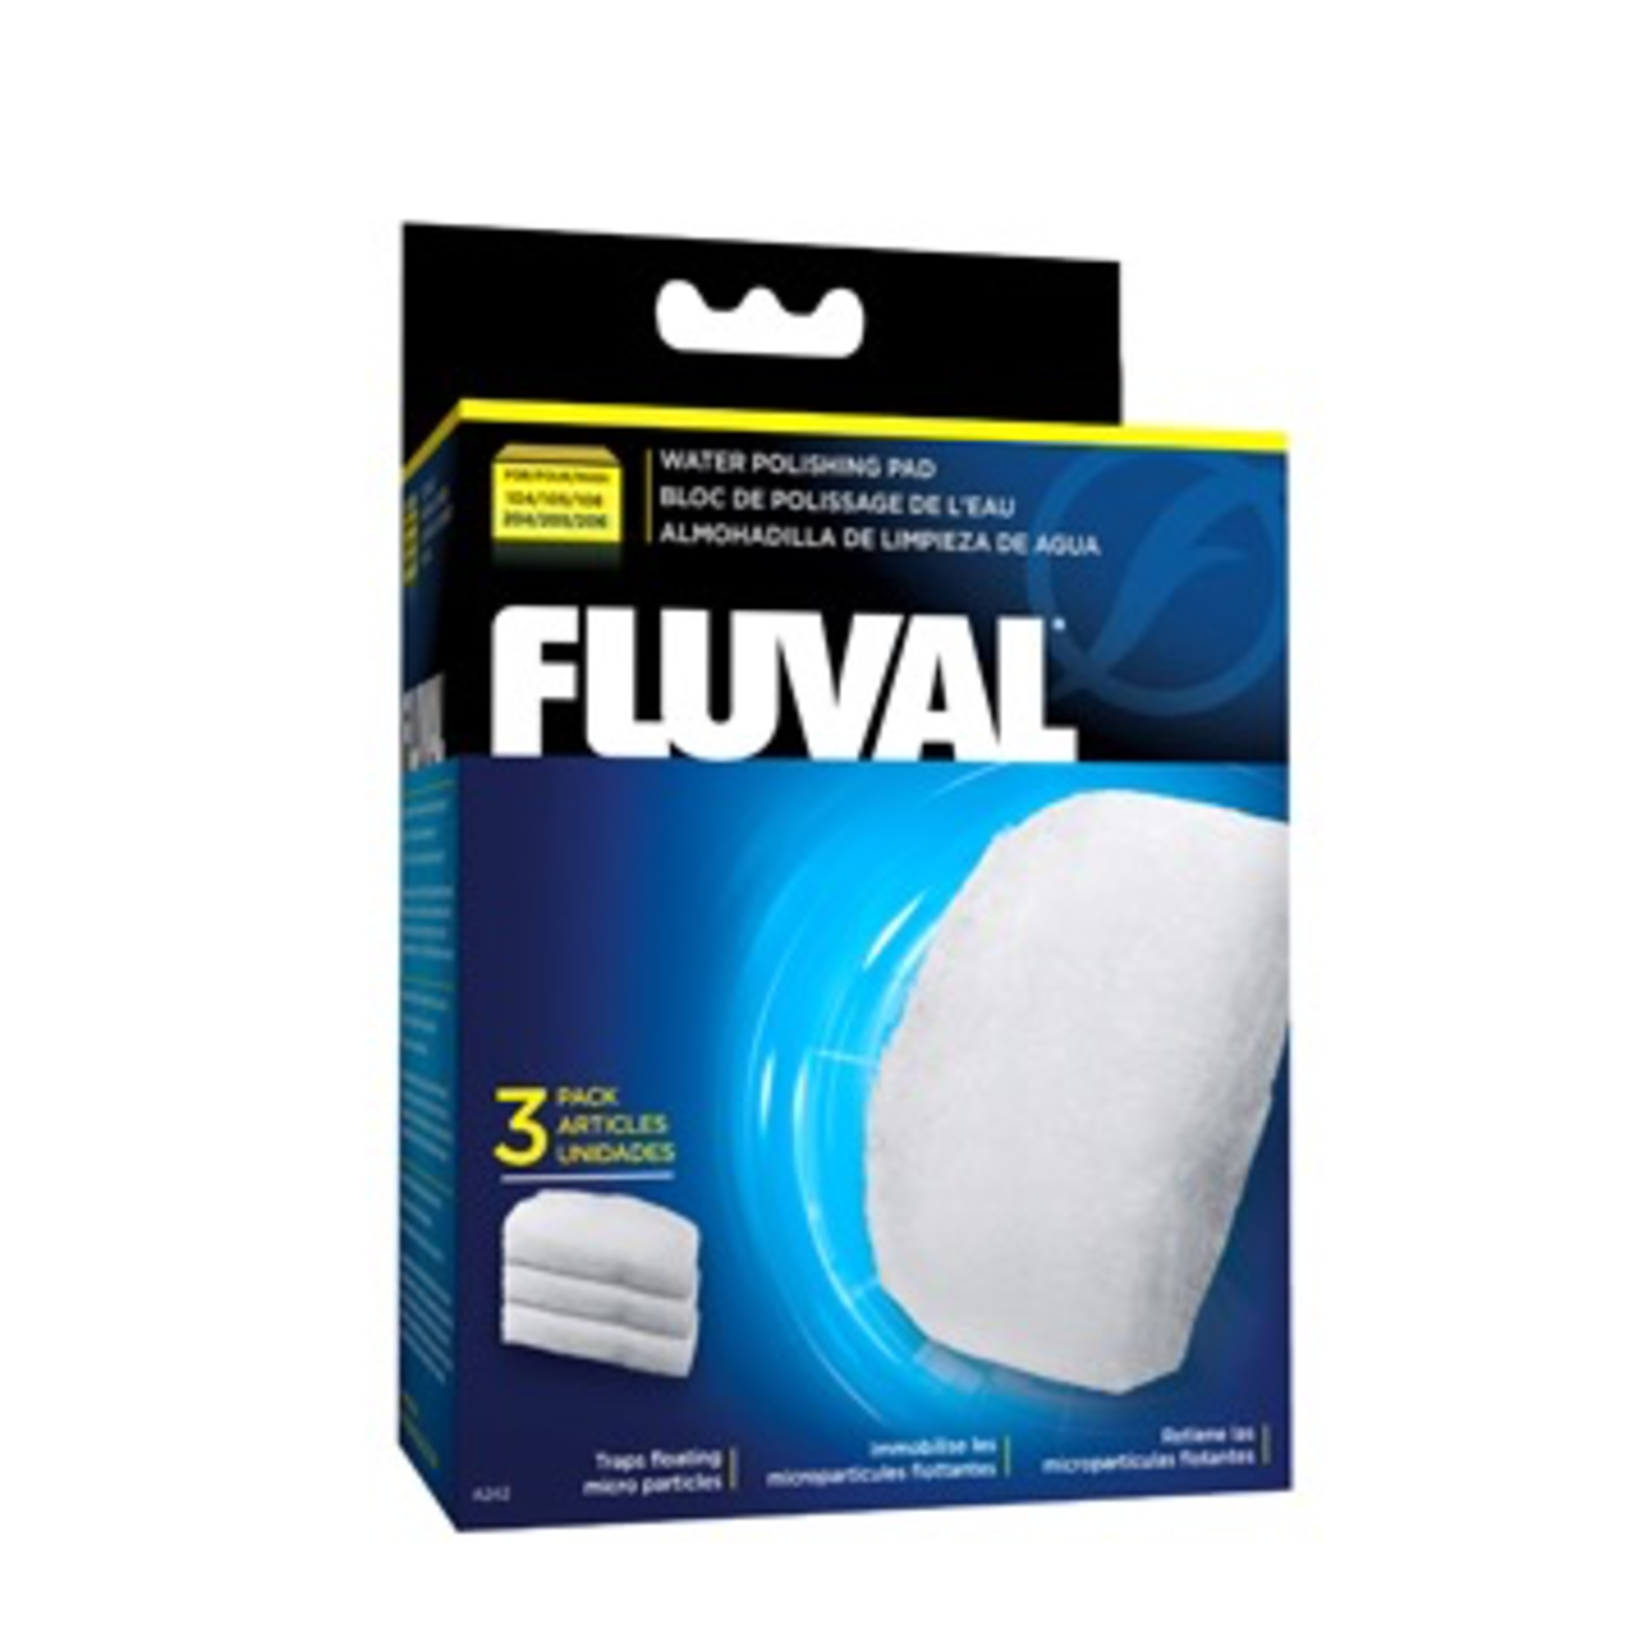 FLUVAL (W) Fluval Polishing Pad for 104/105/106 and 204/205/206 - 3 pieces